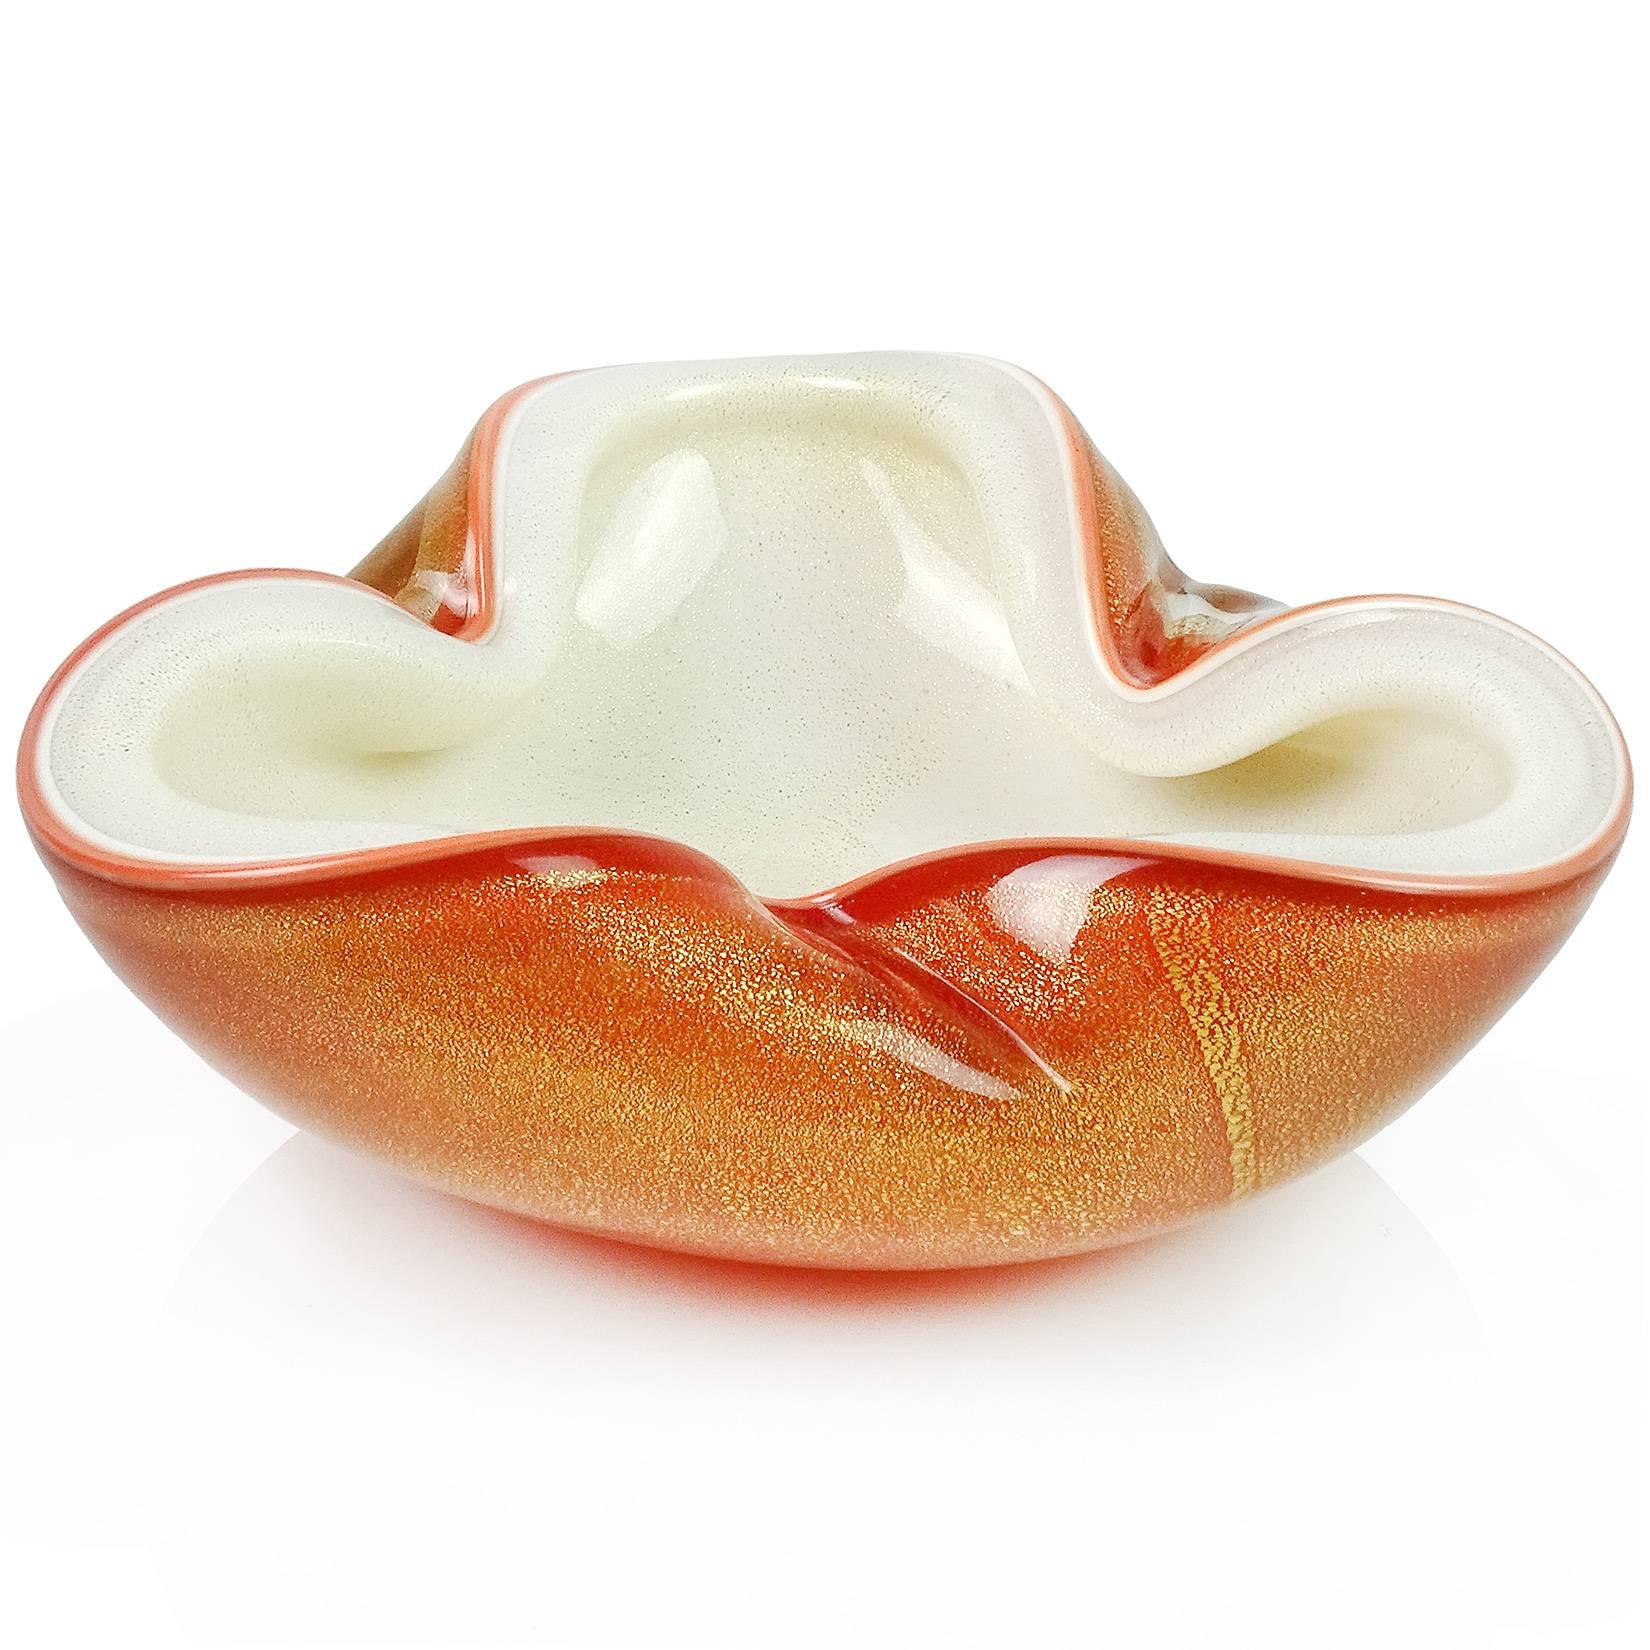 Beautiful vintage Murano hand blown orange over white and gold flecks Italian art glass bowl. Documented to Master glass artist and designer Alfredo Barbini, circa 1950-1960. Can be used as a display piece on any table. Use it as a catchall, or